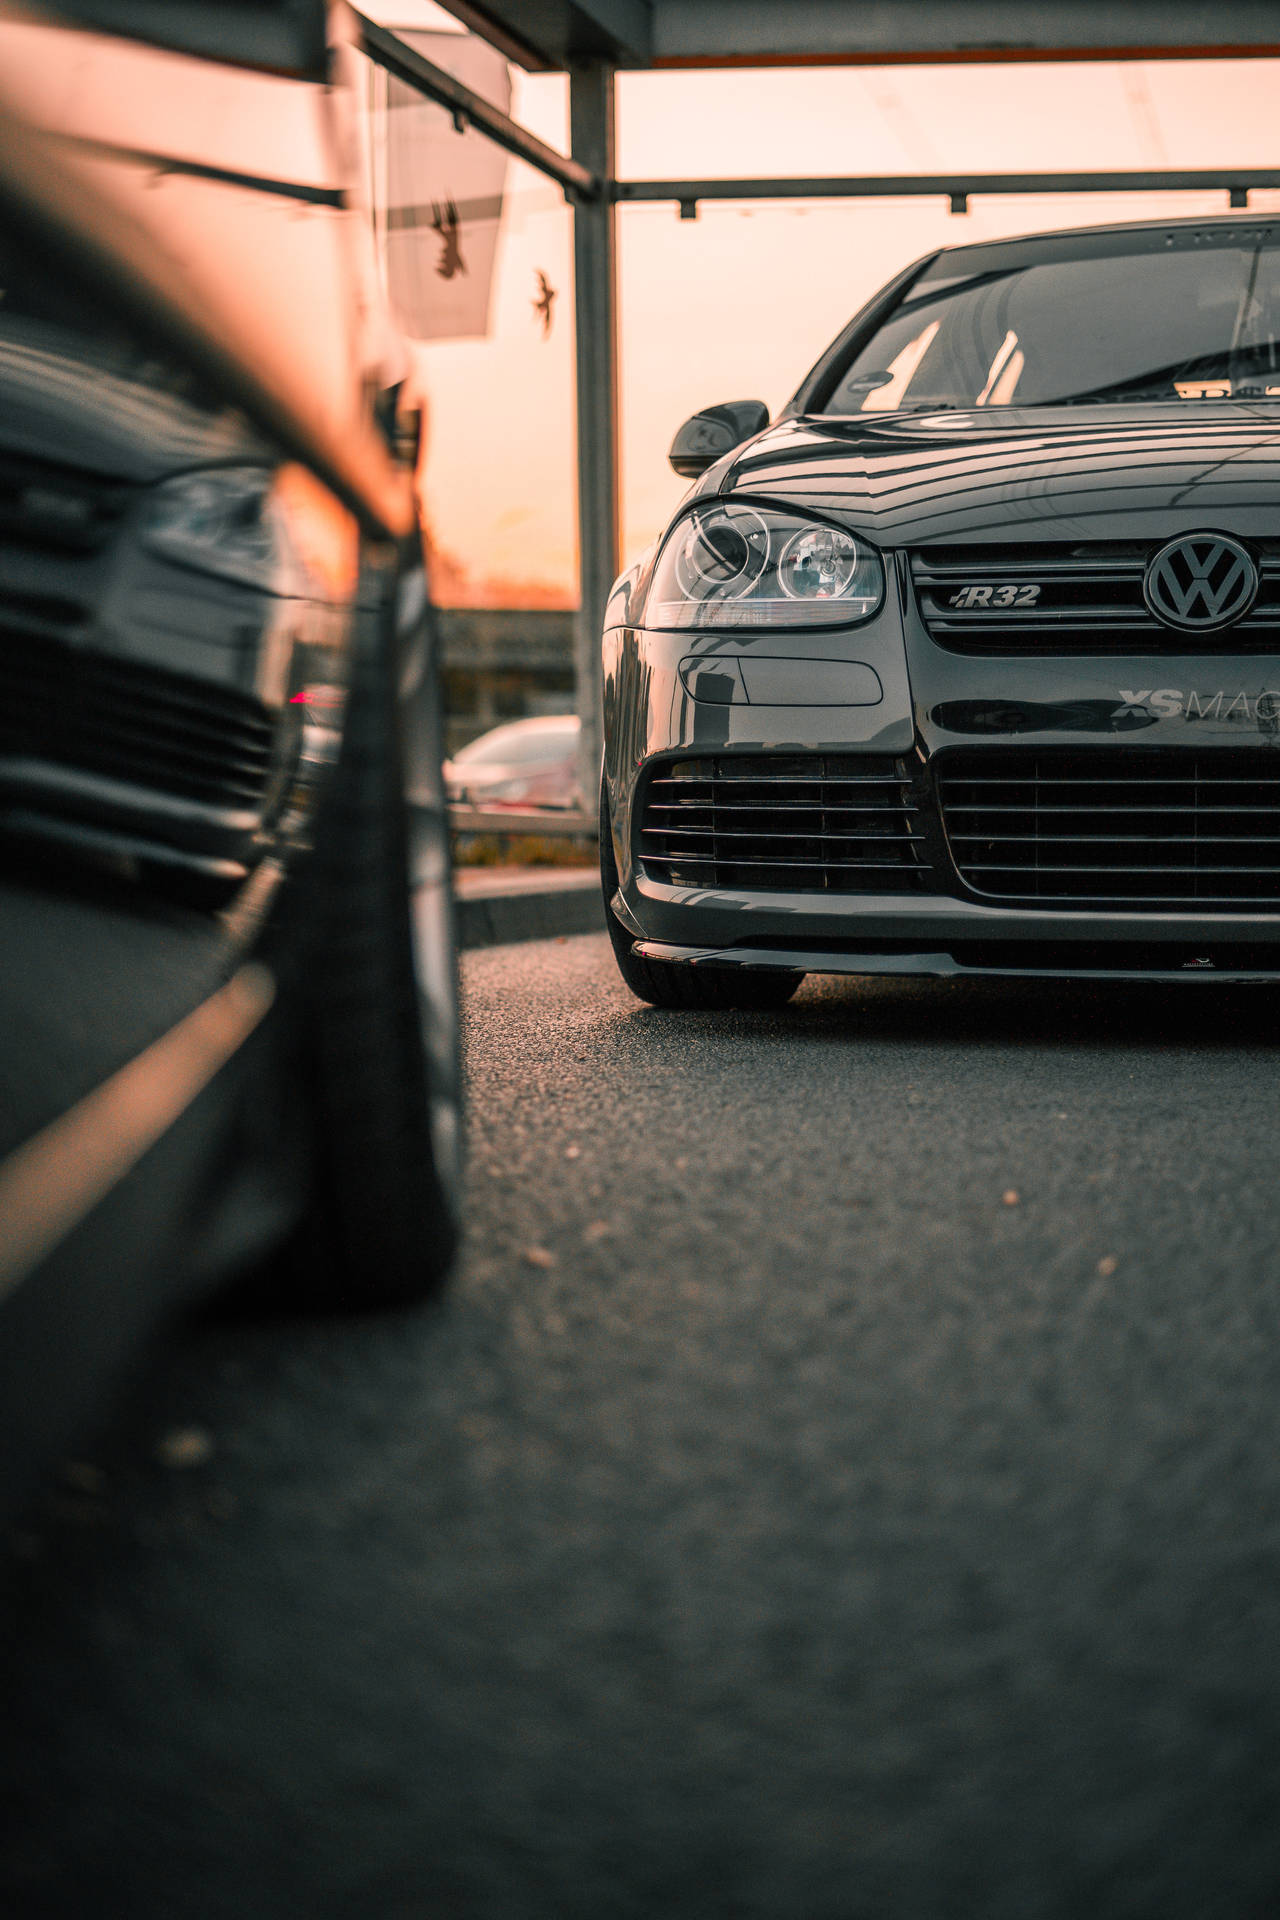 Experience the power of Volkswagen in the ultra-sporty R32 Wallpaper